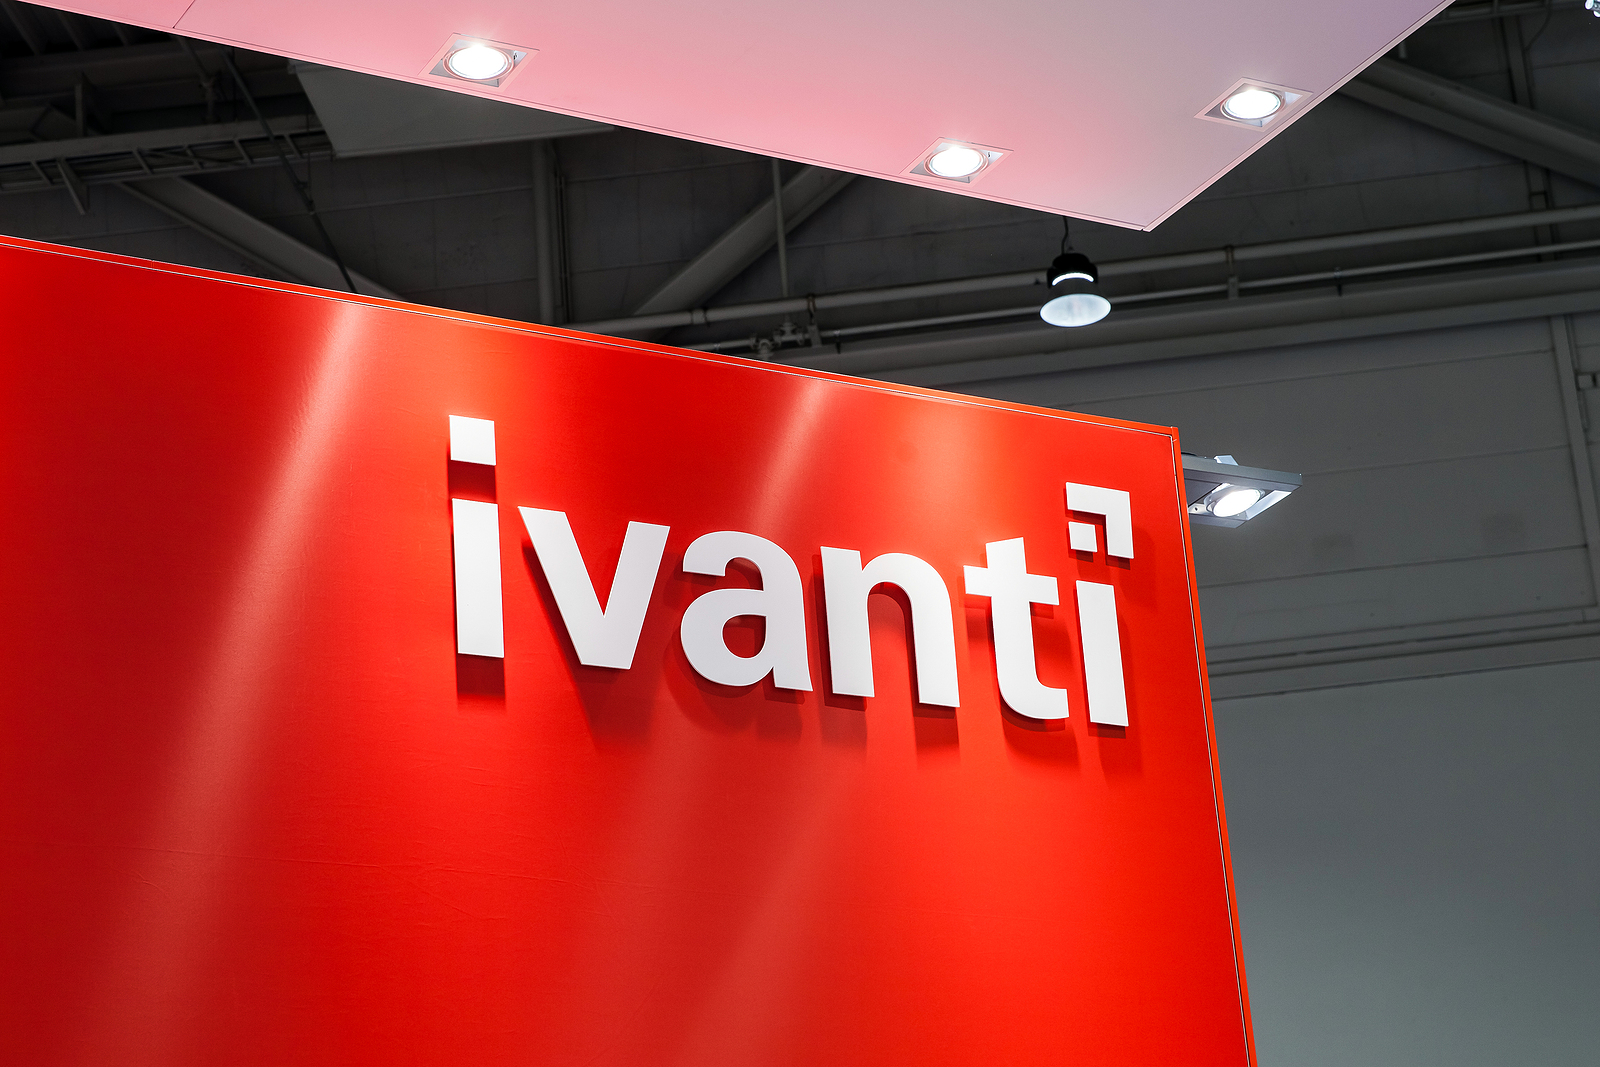 Ivanti Zero-Day Vulnerability Exploited in Attack on Norwegian Government – Source: www.securityweek.com